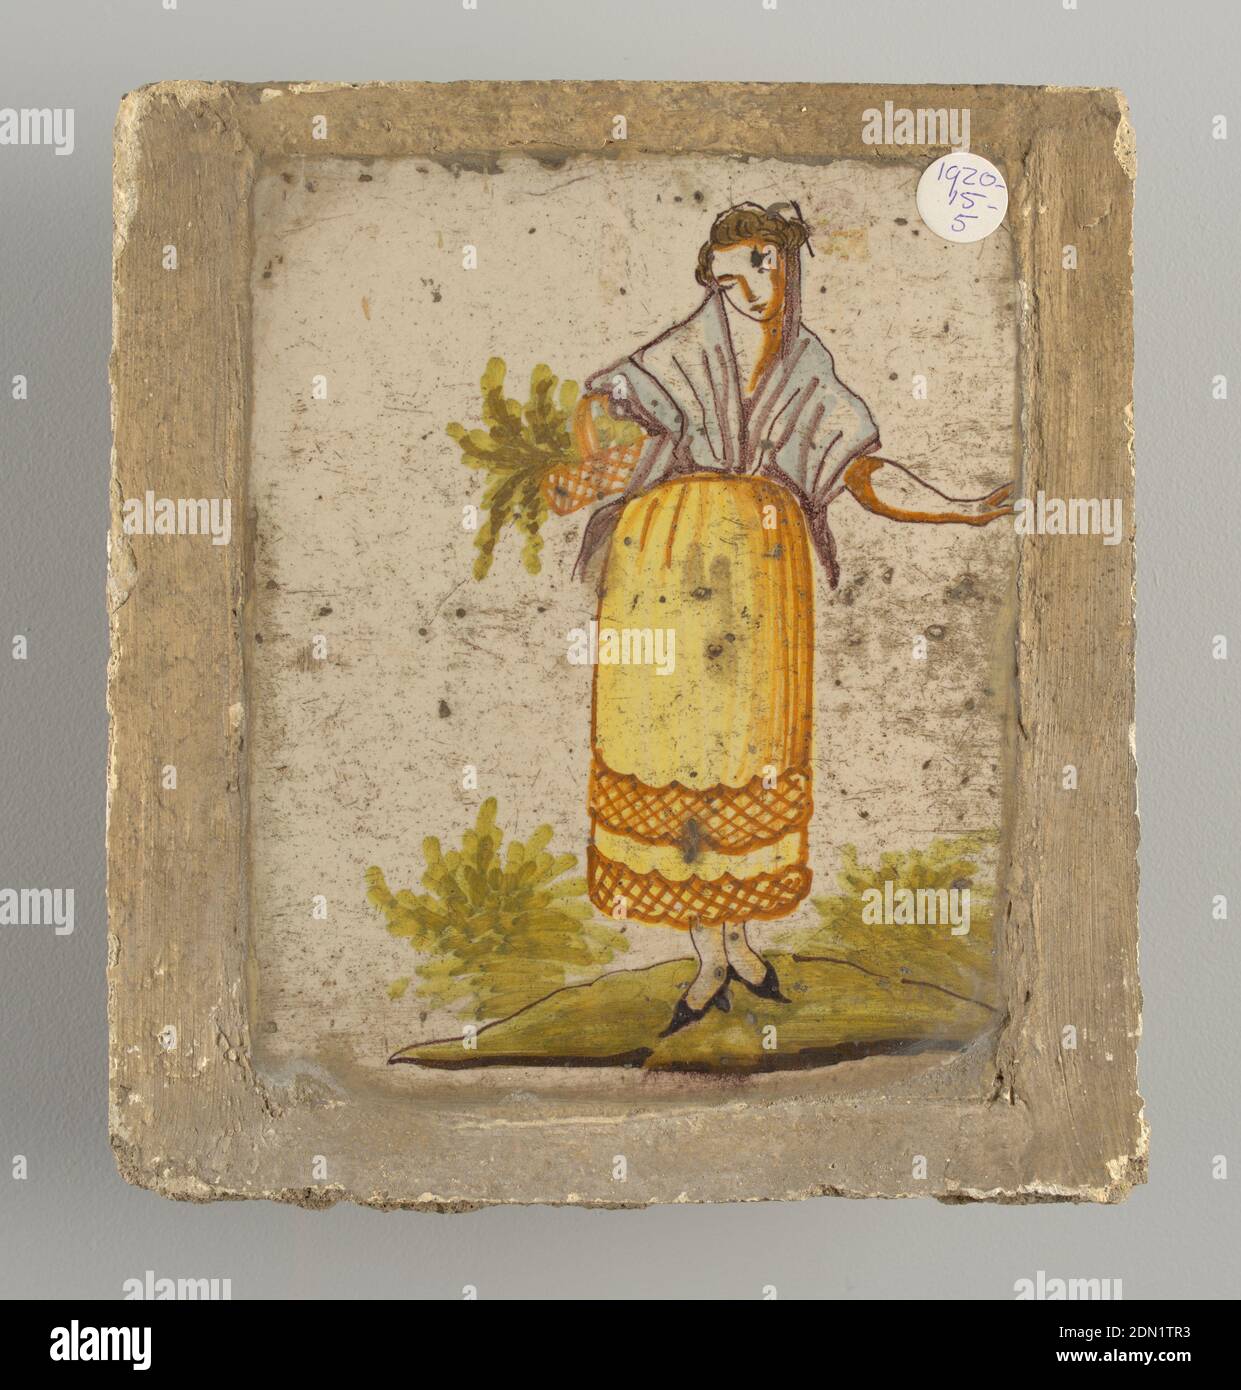 Tile, Earthenware, glazed and high fire decorated, Woman in yellow shirt and white shawl carrying a basket with greens on right arm., Alcora, Spain, late 18th–early 19th century, tiles, Decorative Arts, Tile Stock Photo